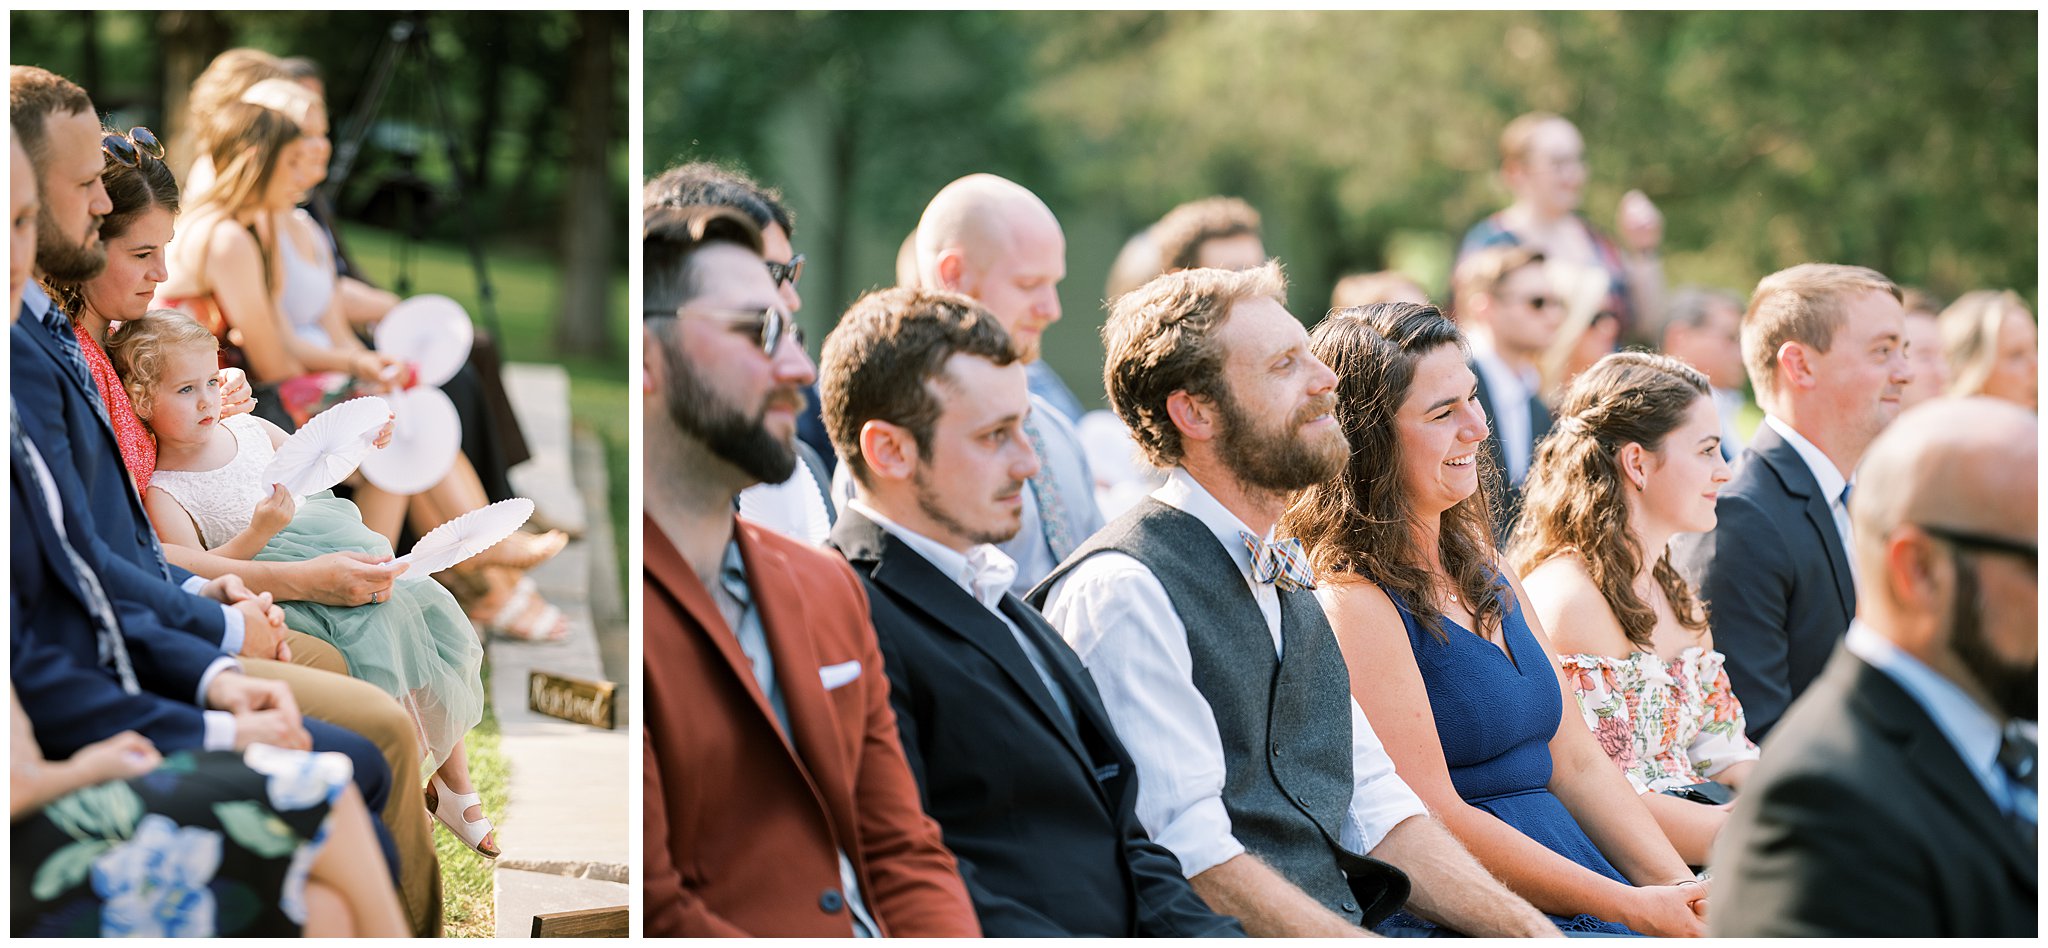 guests during outdoor wedding ceremony at Cedarmont Farm 